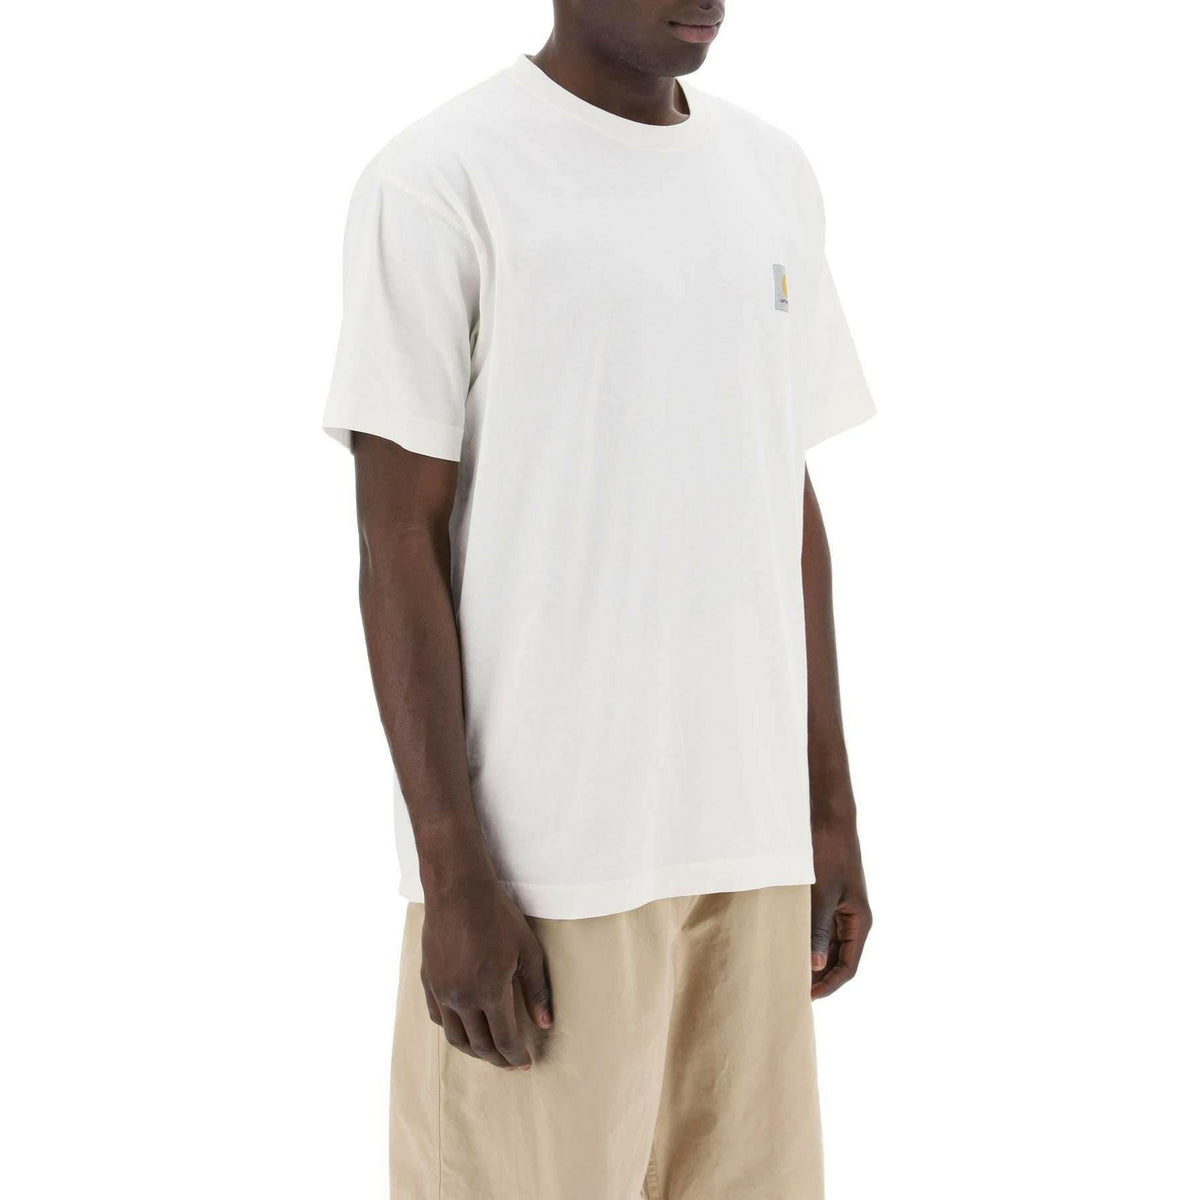 CARHARTT WIP - Wax White Cotton Jersey T-Shirt With Lived-In Look - JOHN JULIA